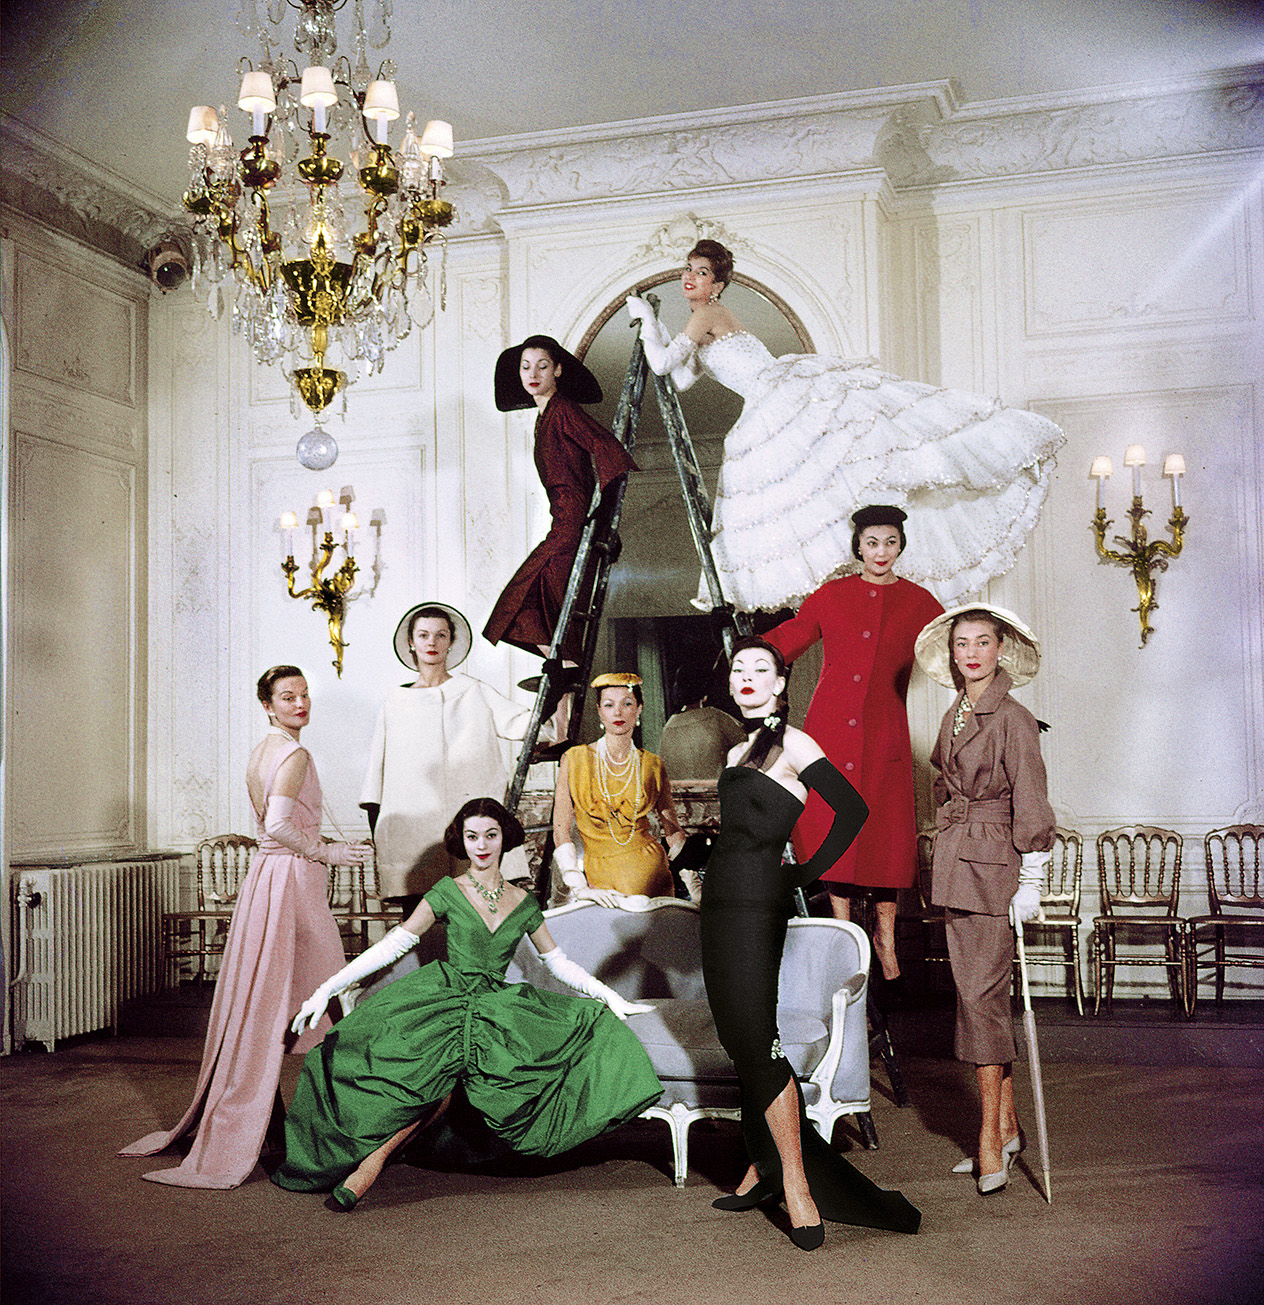 Dior: A Fashion House with a Rich History